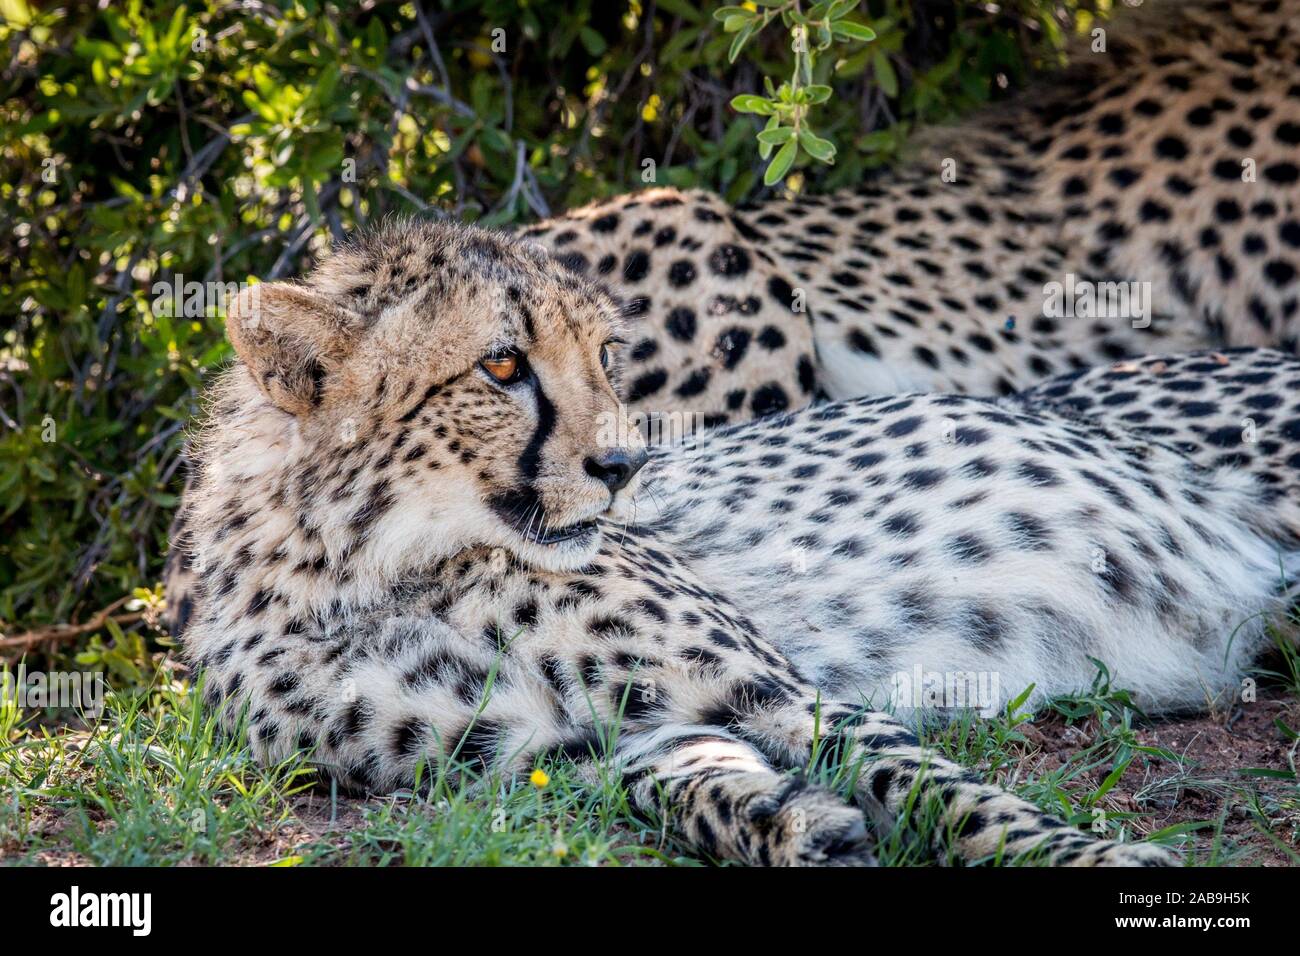 Cheetah laying down and starring in the Welgevonden game reserve, South Africa. Stock Photo